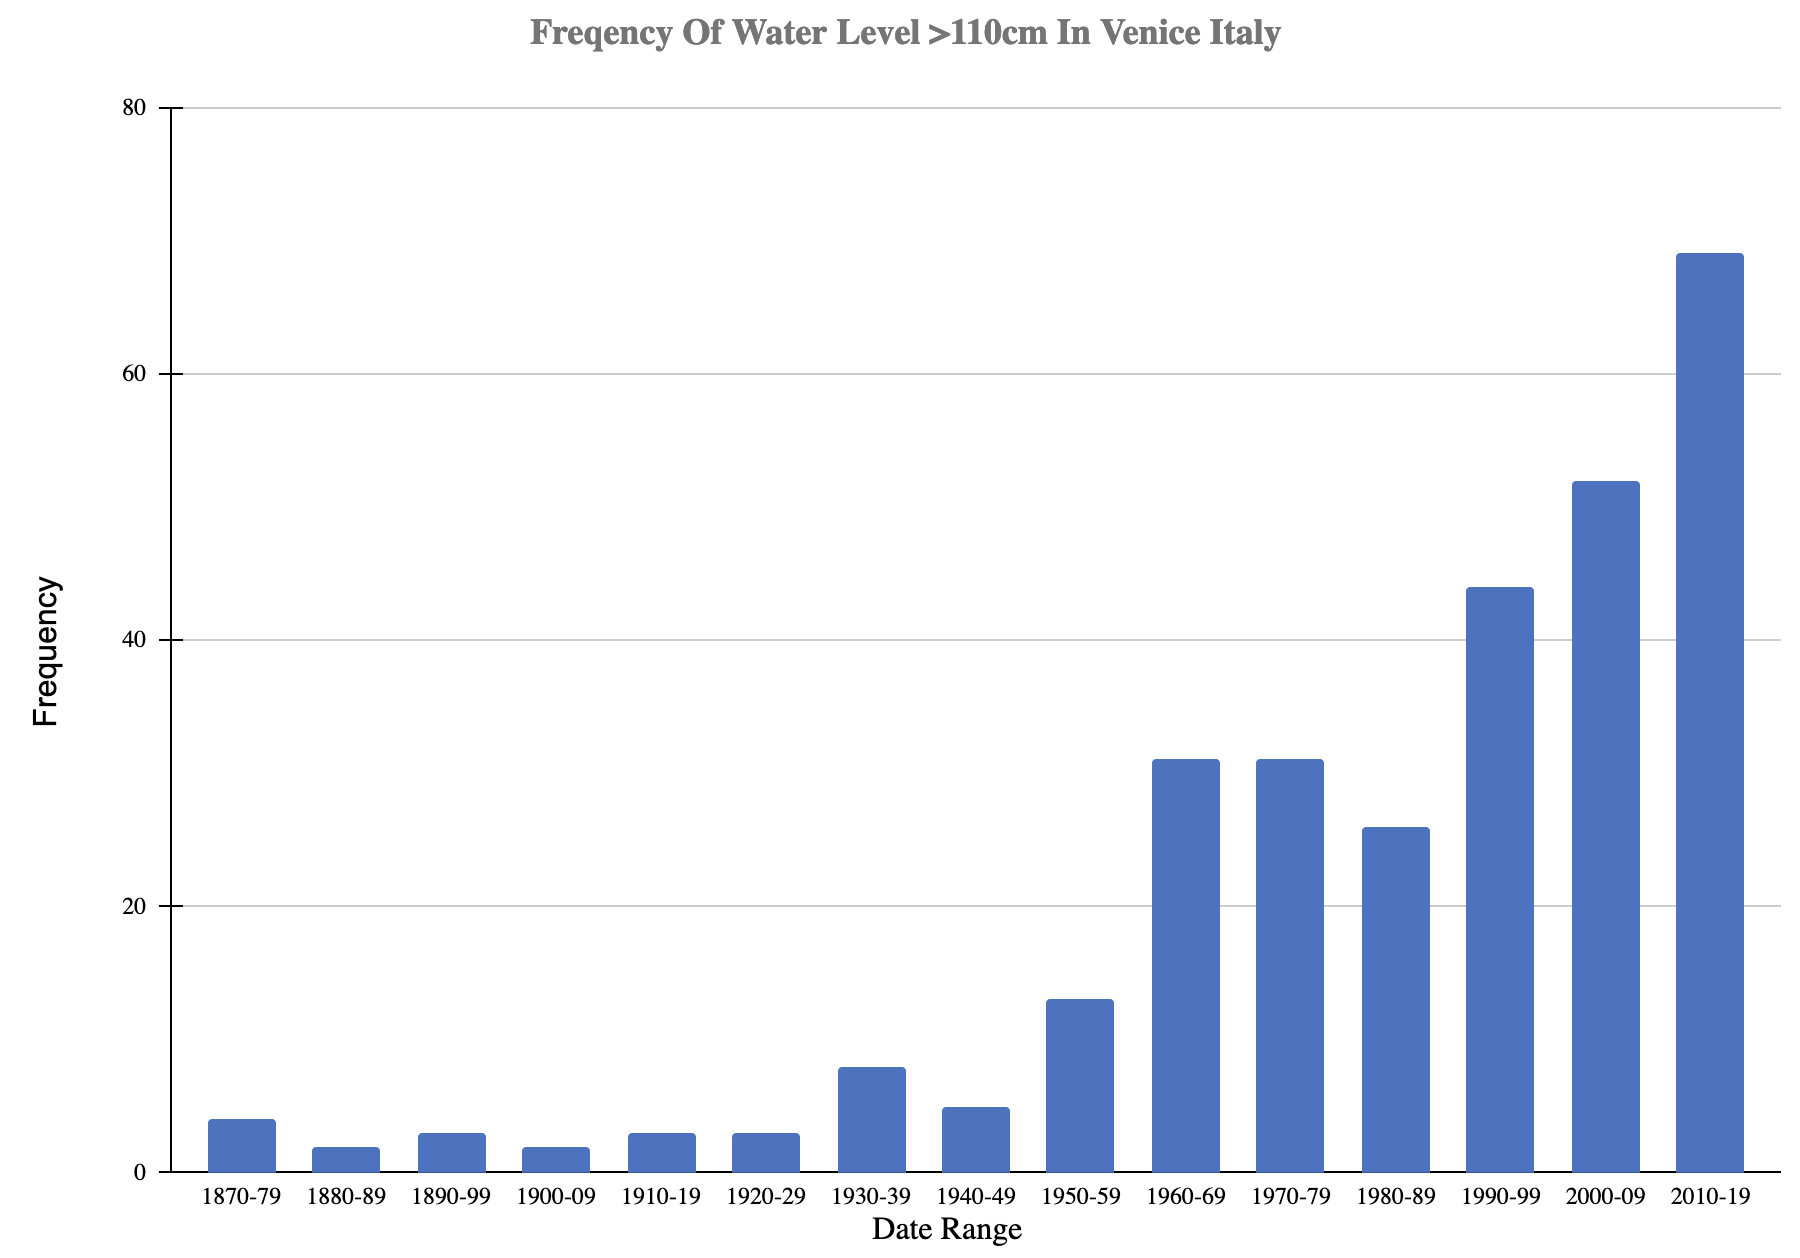 Bar graph showing increased flooding trends in Venice Italy